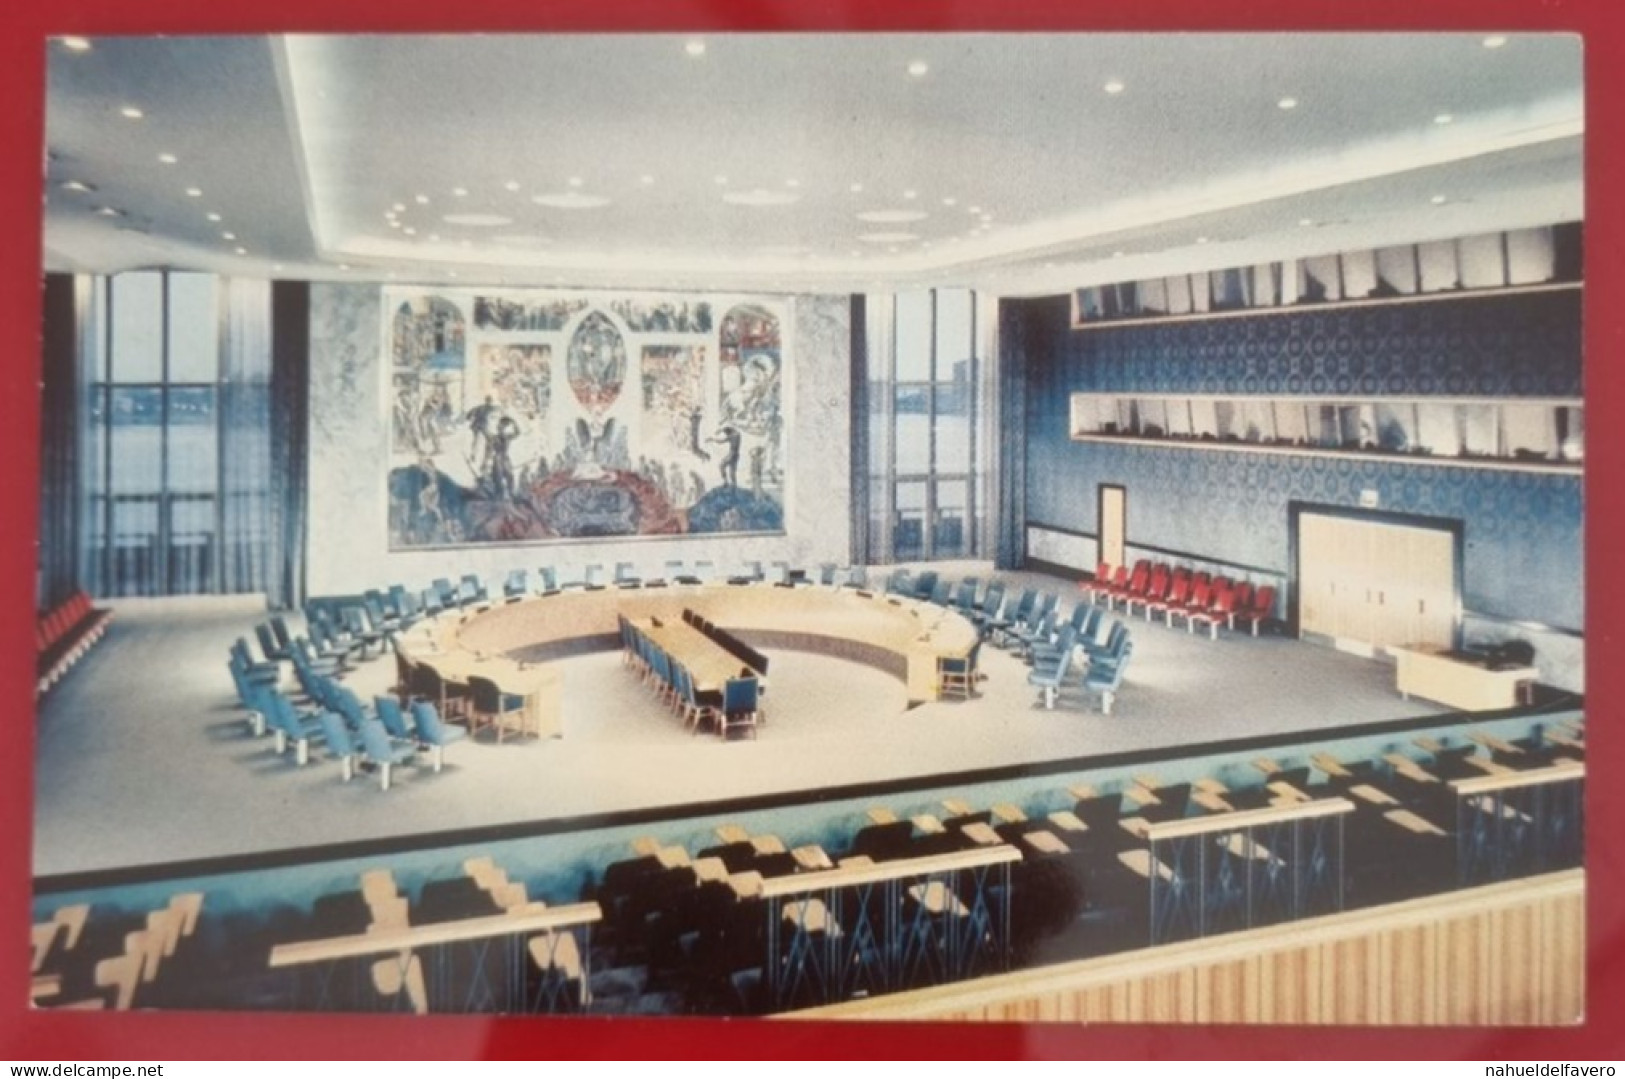 Uncirculated Postcard - USA - NY, NEW YORK CITY - UNITED NATIONS, SECURITY COUNCIL CHAMBER - Places